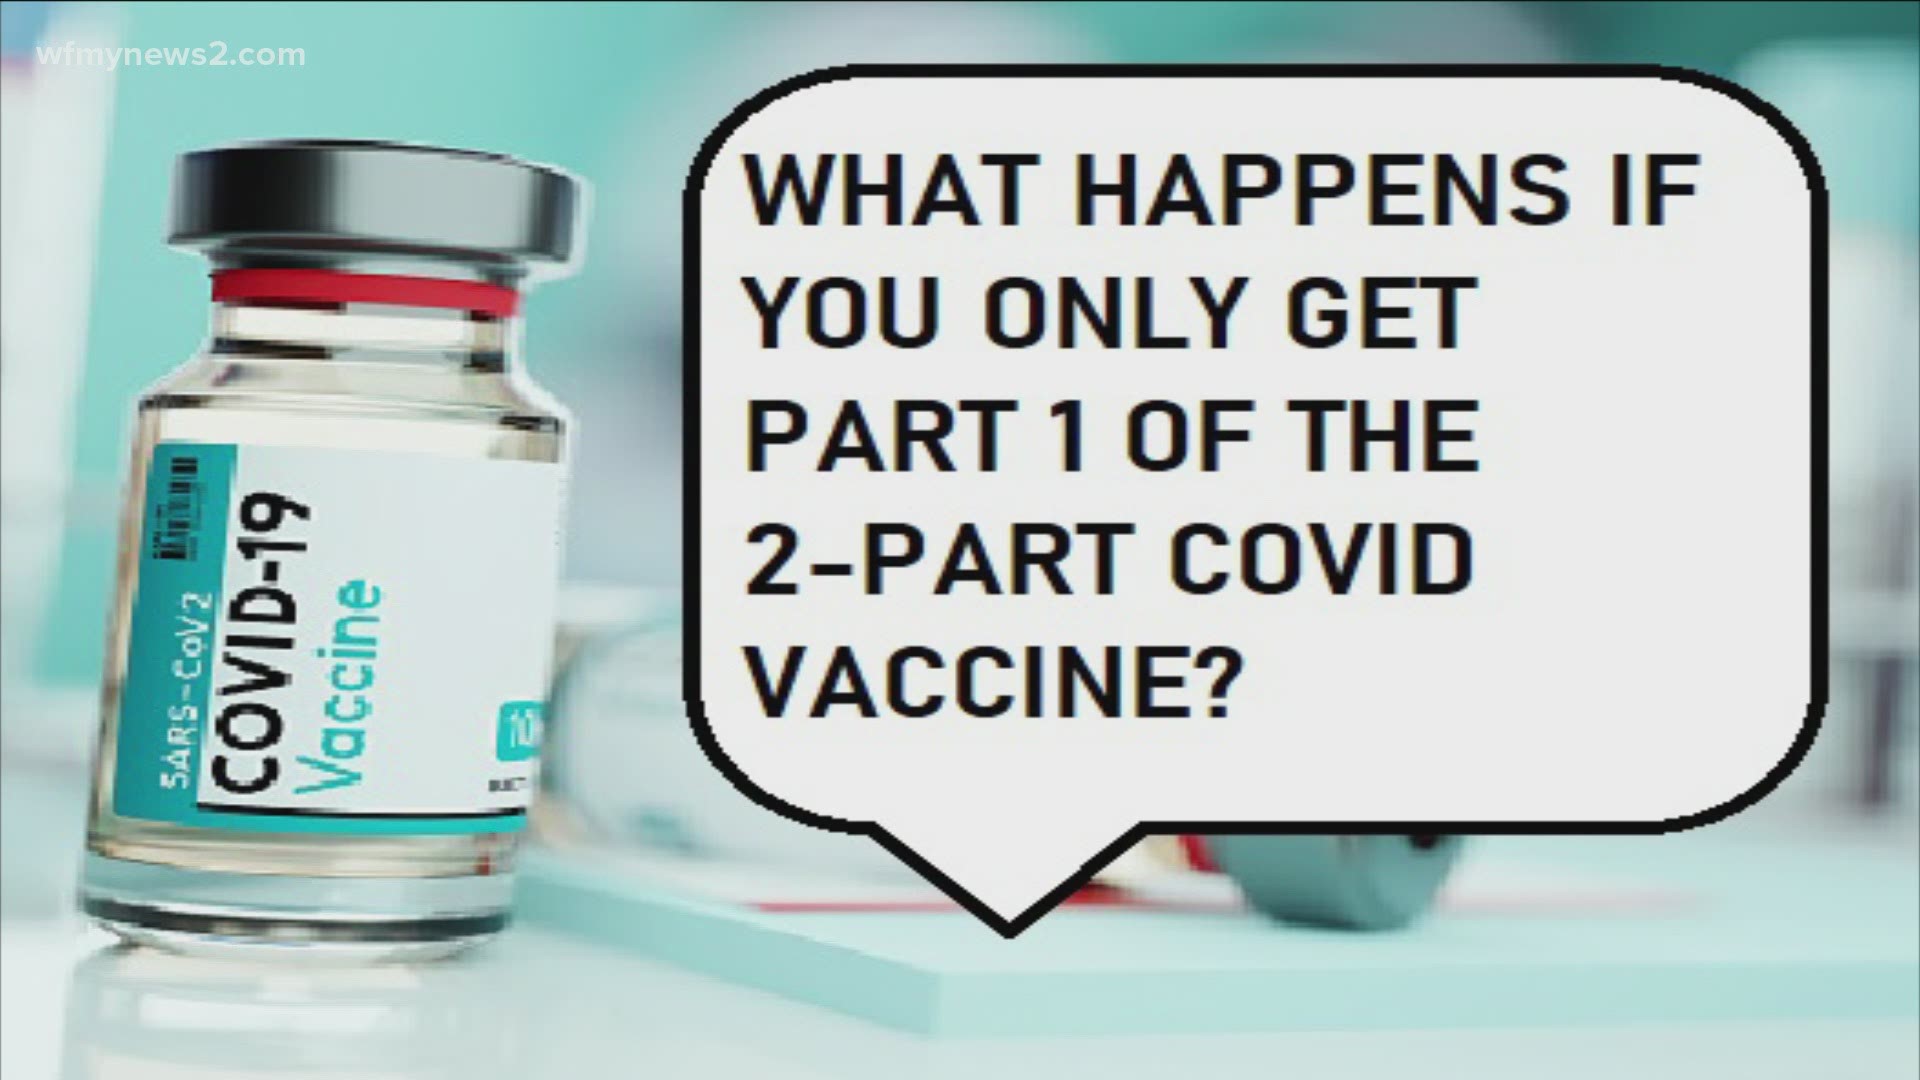 The COVID-19 vaccine is a two dose vaccine, but what really happens if you just take one dose?